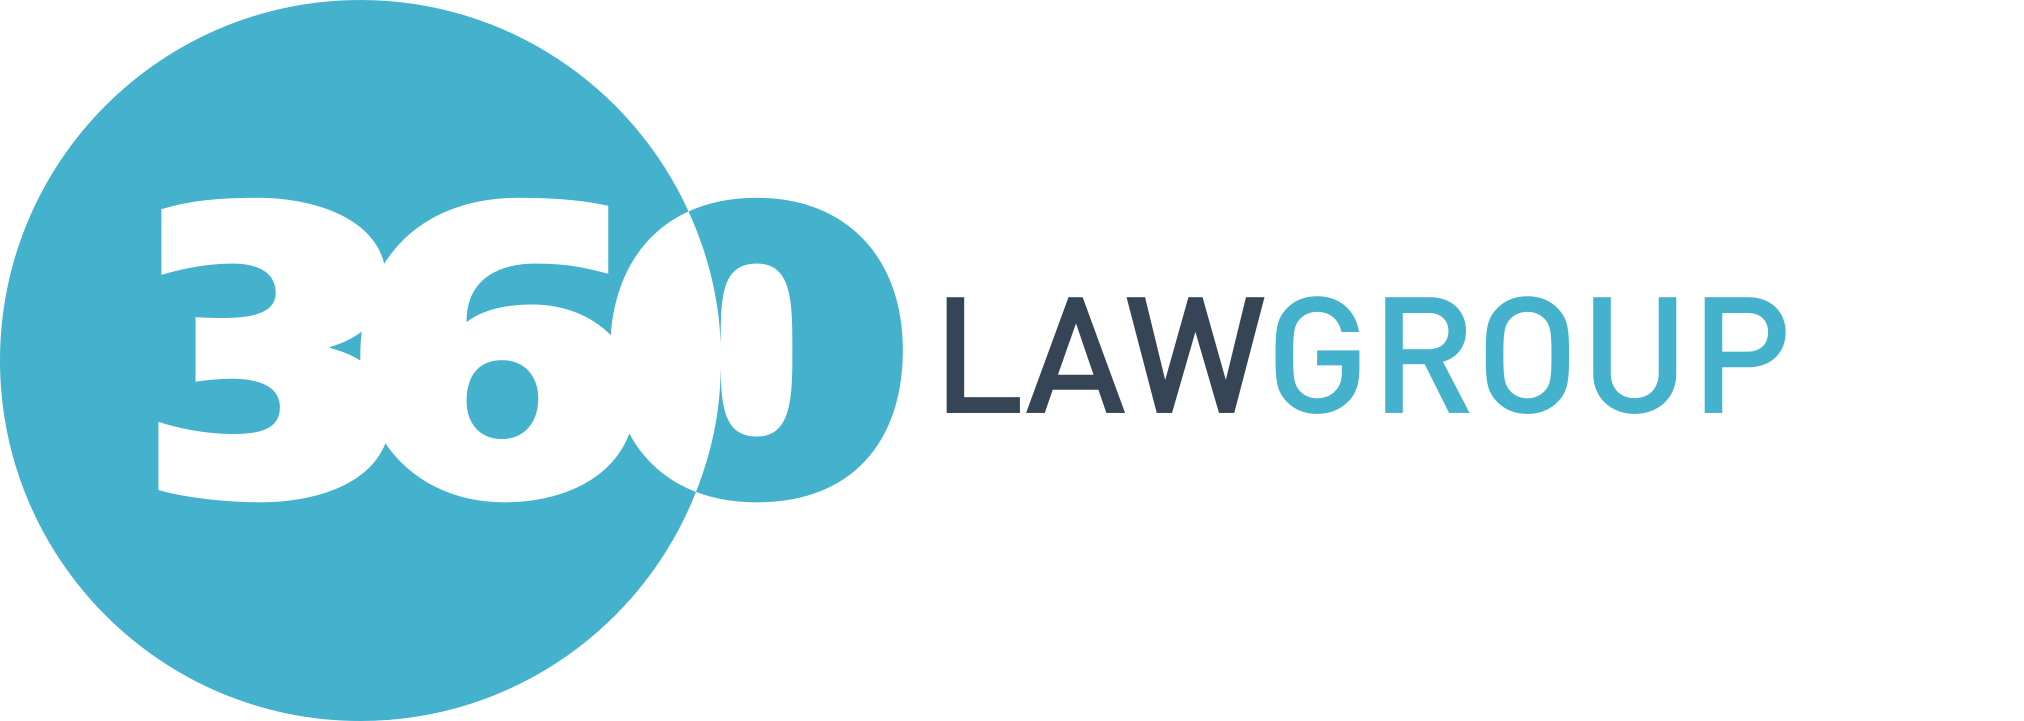 360 Law Group